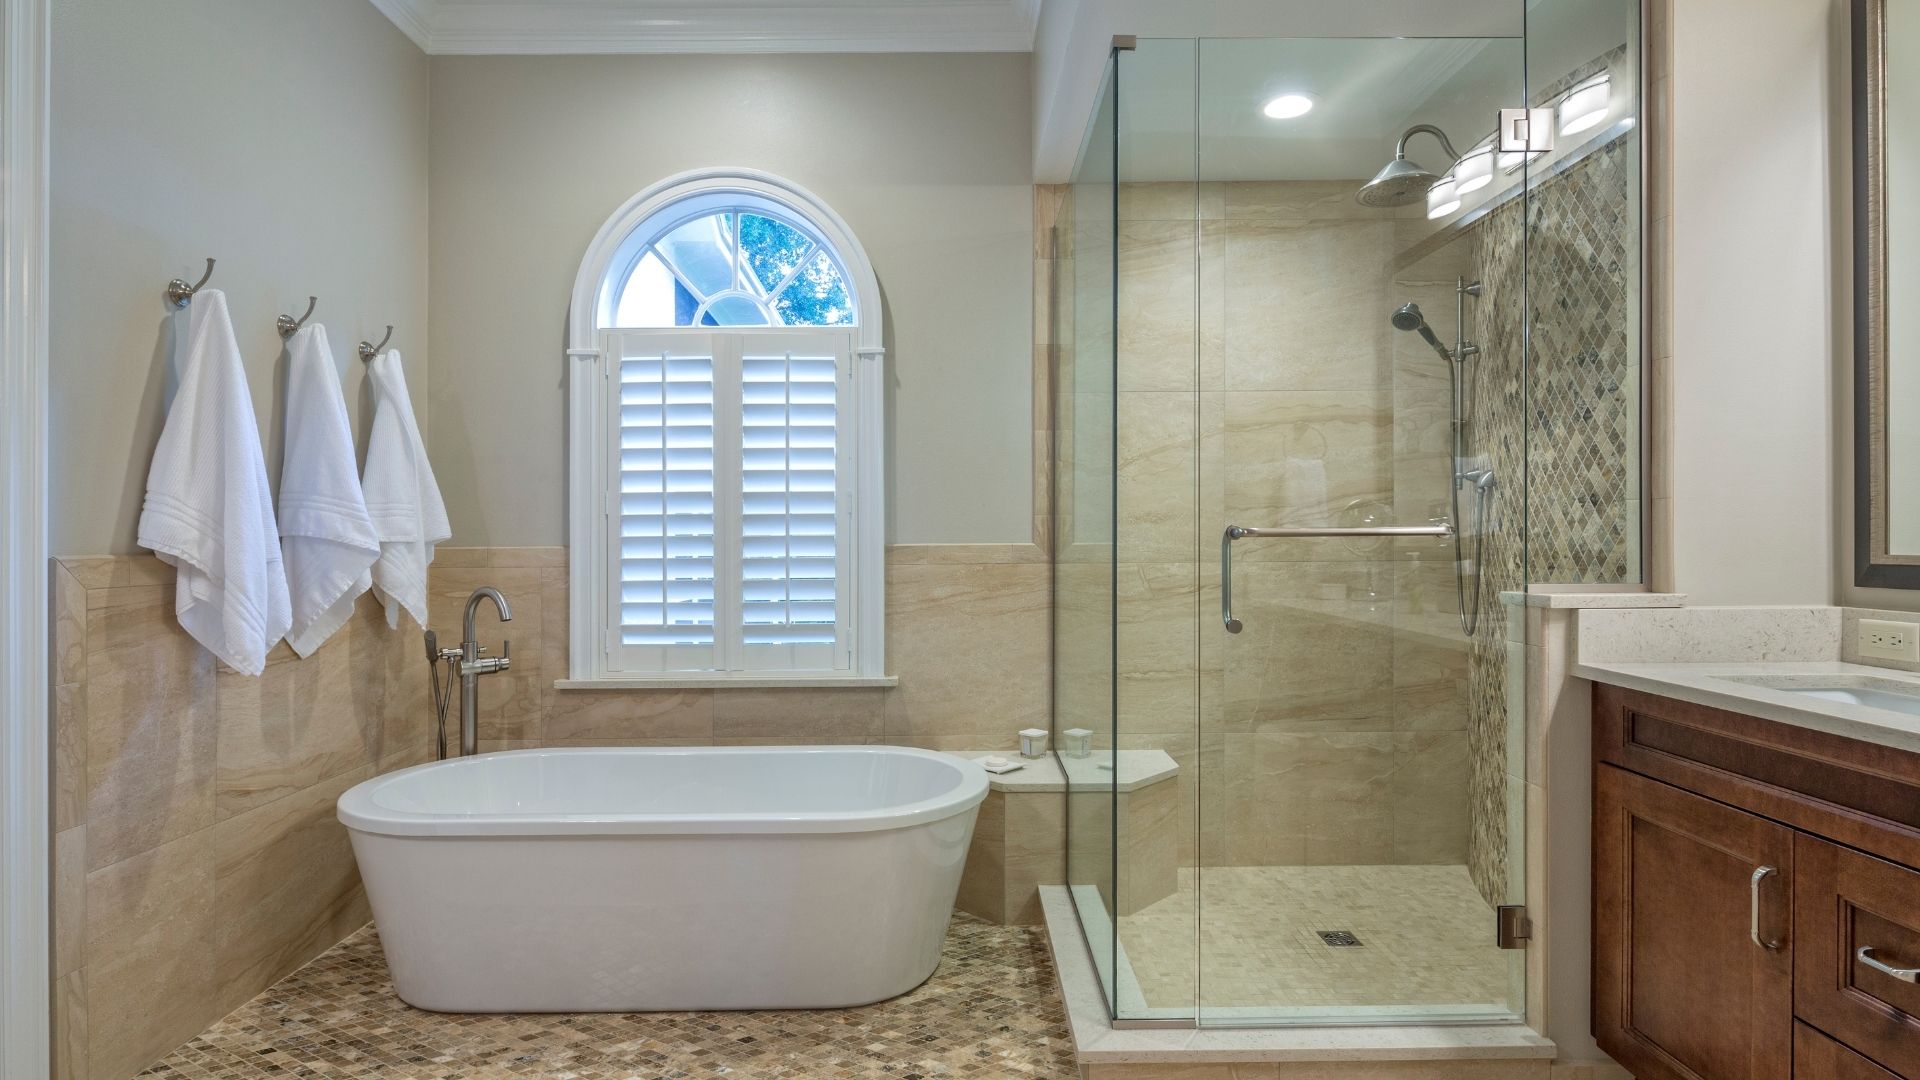 A new bathroom remodelled in Bradenton by Bradenton Bathroom Remodels